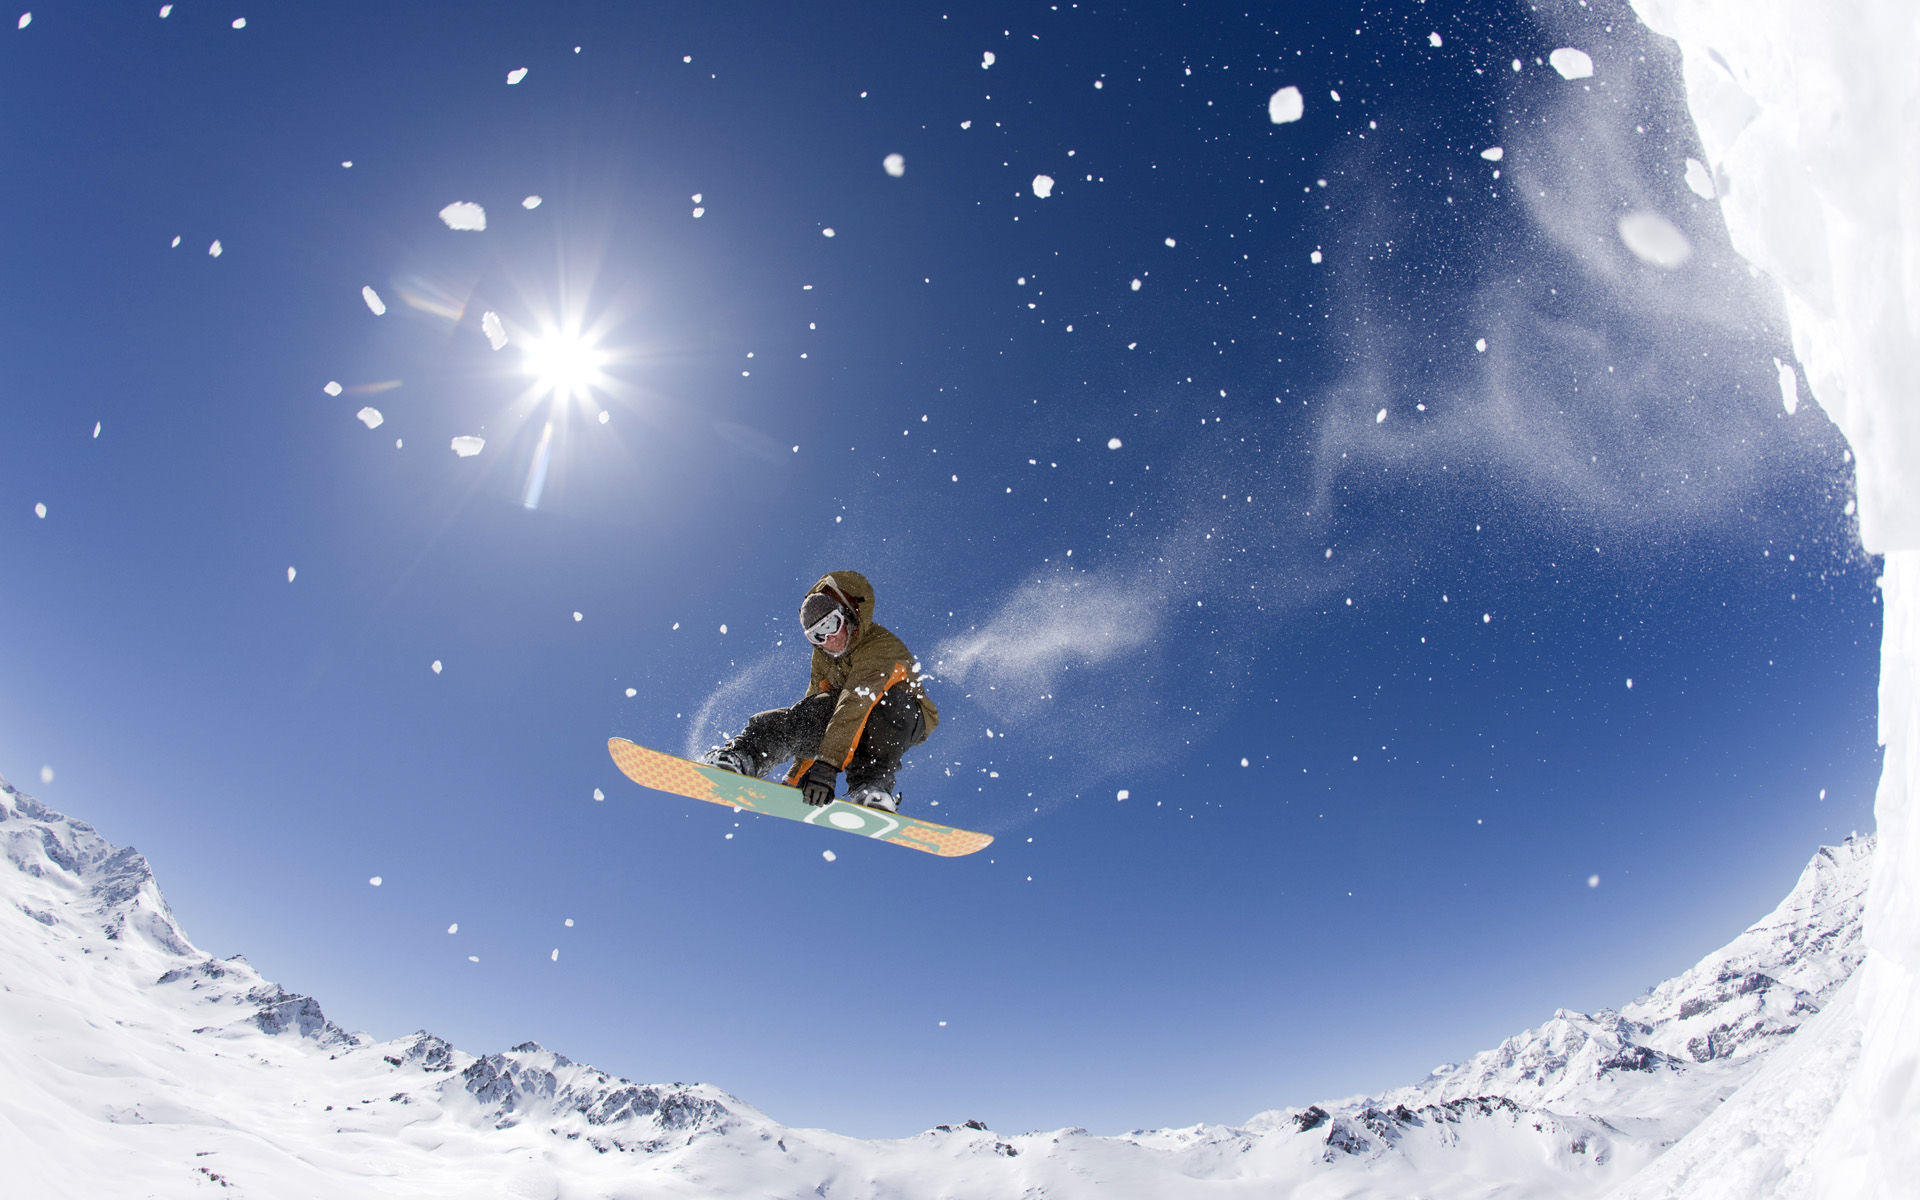 Winter Extreme Sports Wallpaper Hq